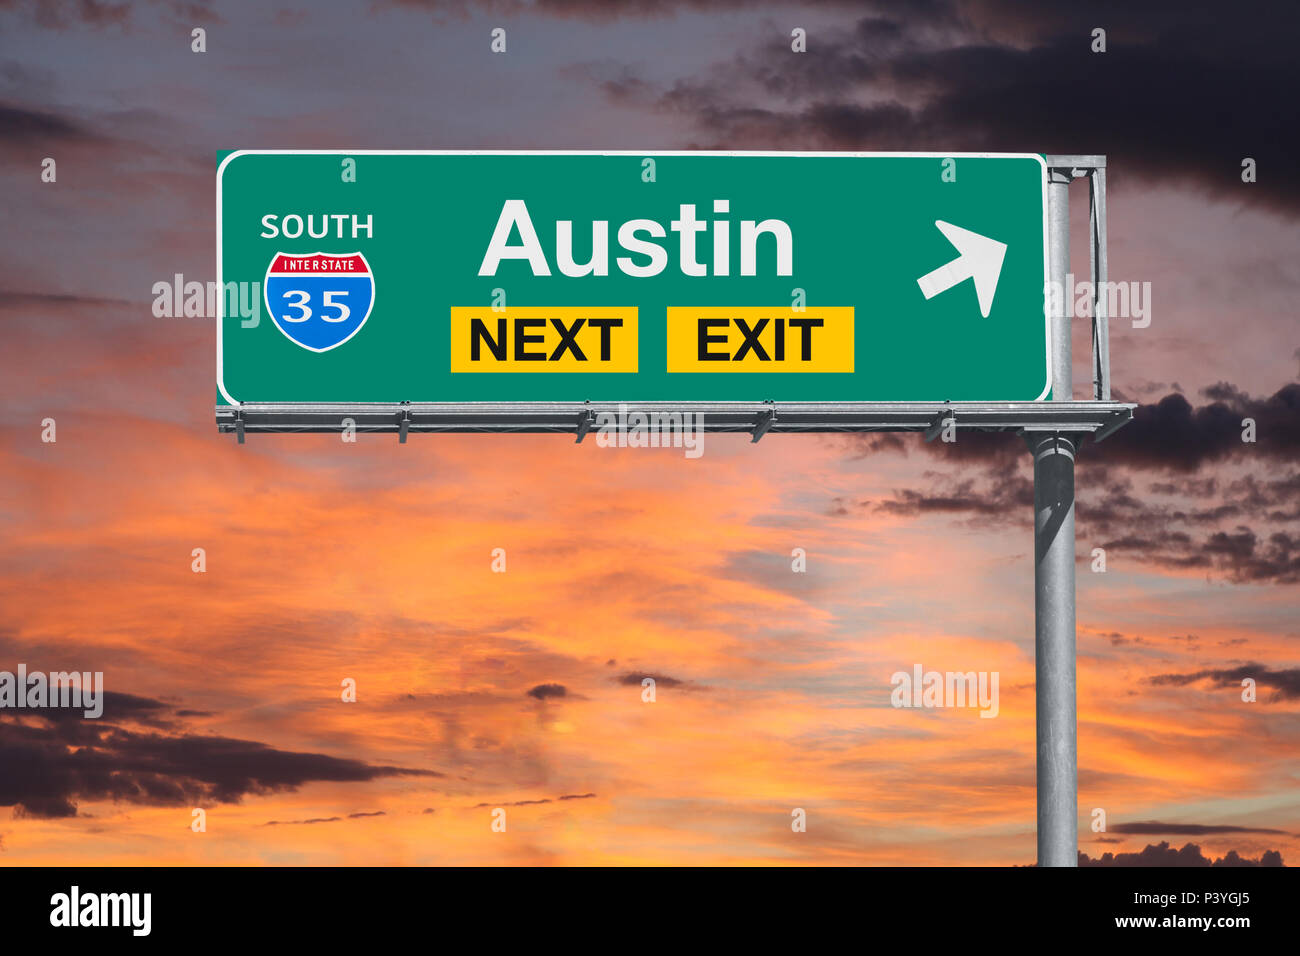 Austin Texas route 35 freeway next exit sign with sunset sky. Stock Photo